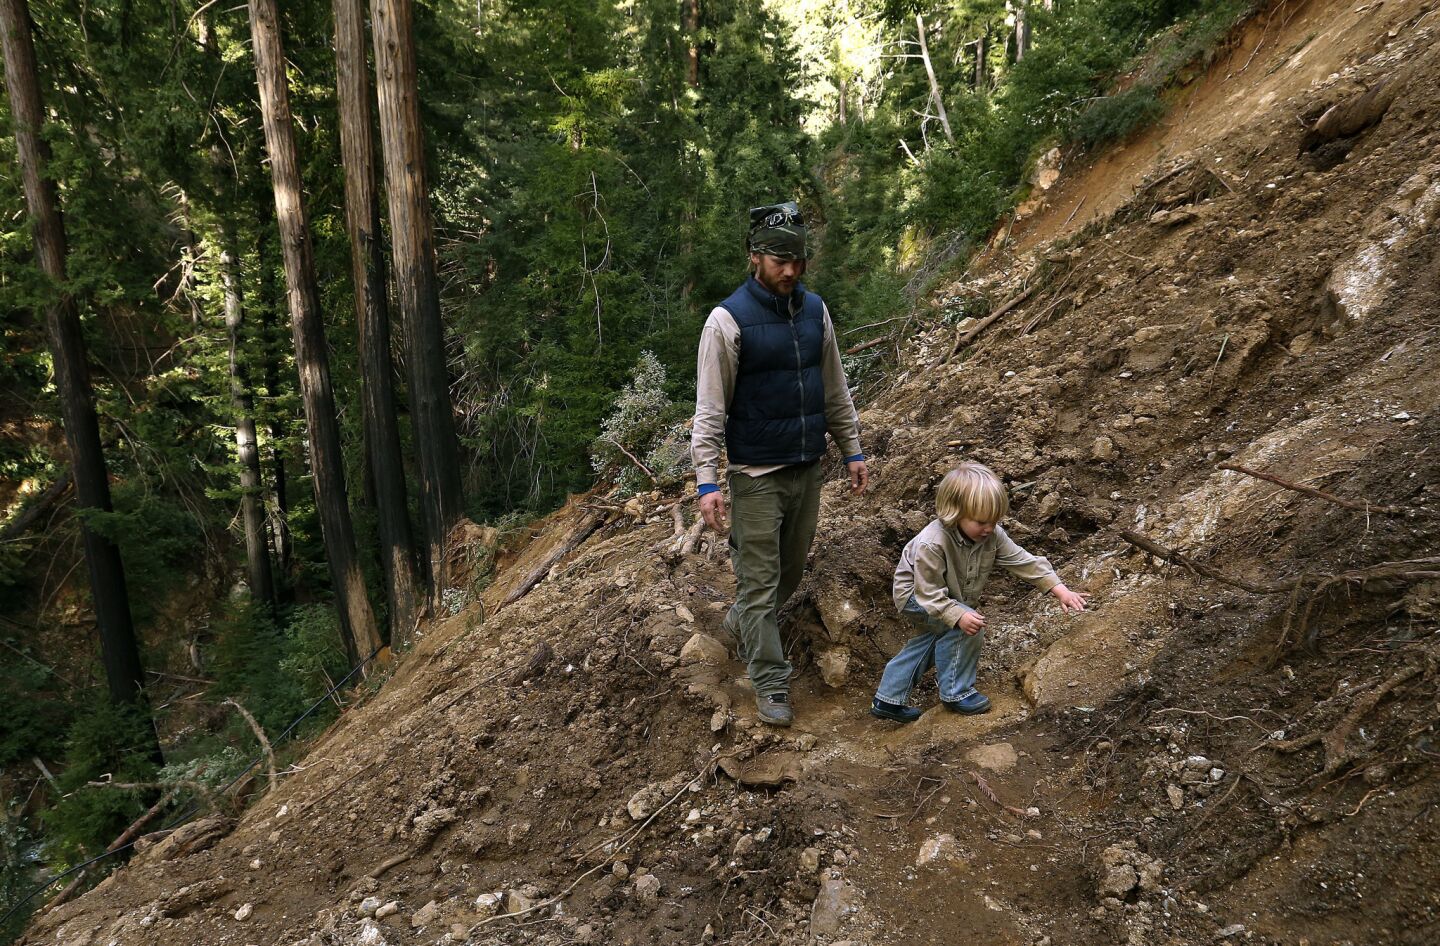 With the road taken out by a massive landslide, Big Sur resident Scott Moffat and his son Roman, 4, hike through muck and debris above the Ventana Inn to get to their truck.